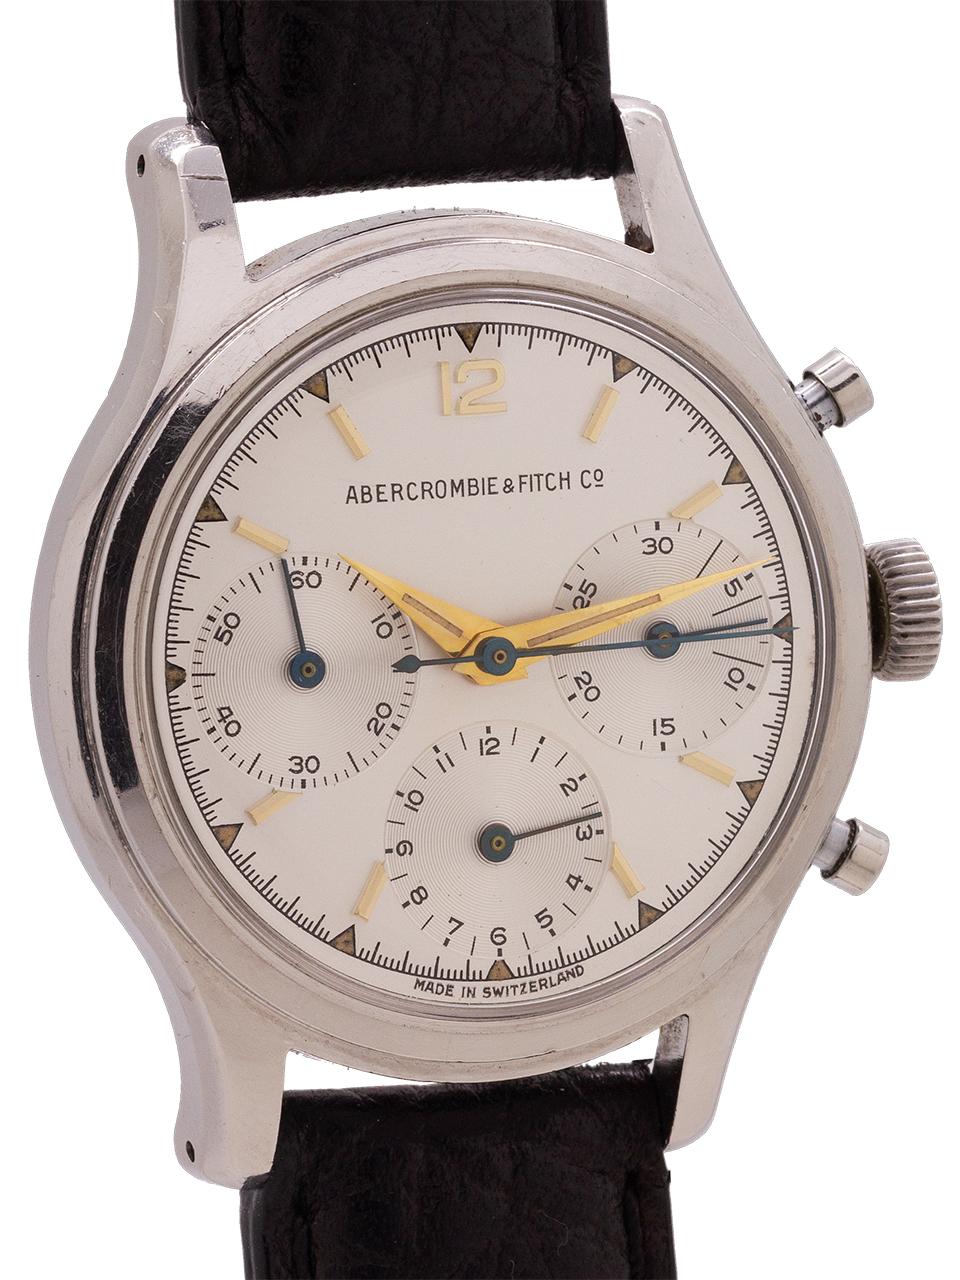 
Abercrombie & Fitch stainless steel manual wind chronograph made by Heuer, circa early 1960’s. 36mm stainless steel case with waterproof screw down caseback, stepped bezel, and small pump pushers. Powered by the not yet but soon to be famous